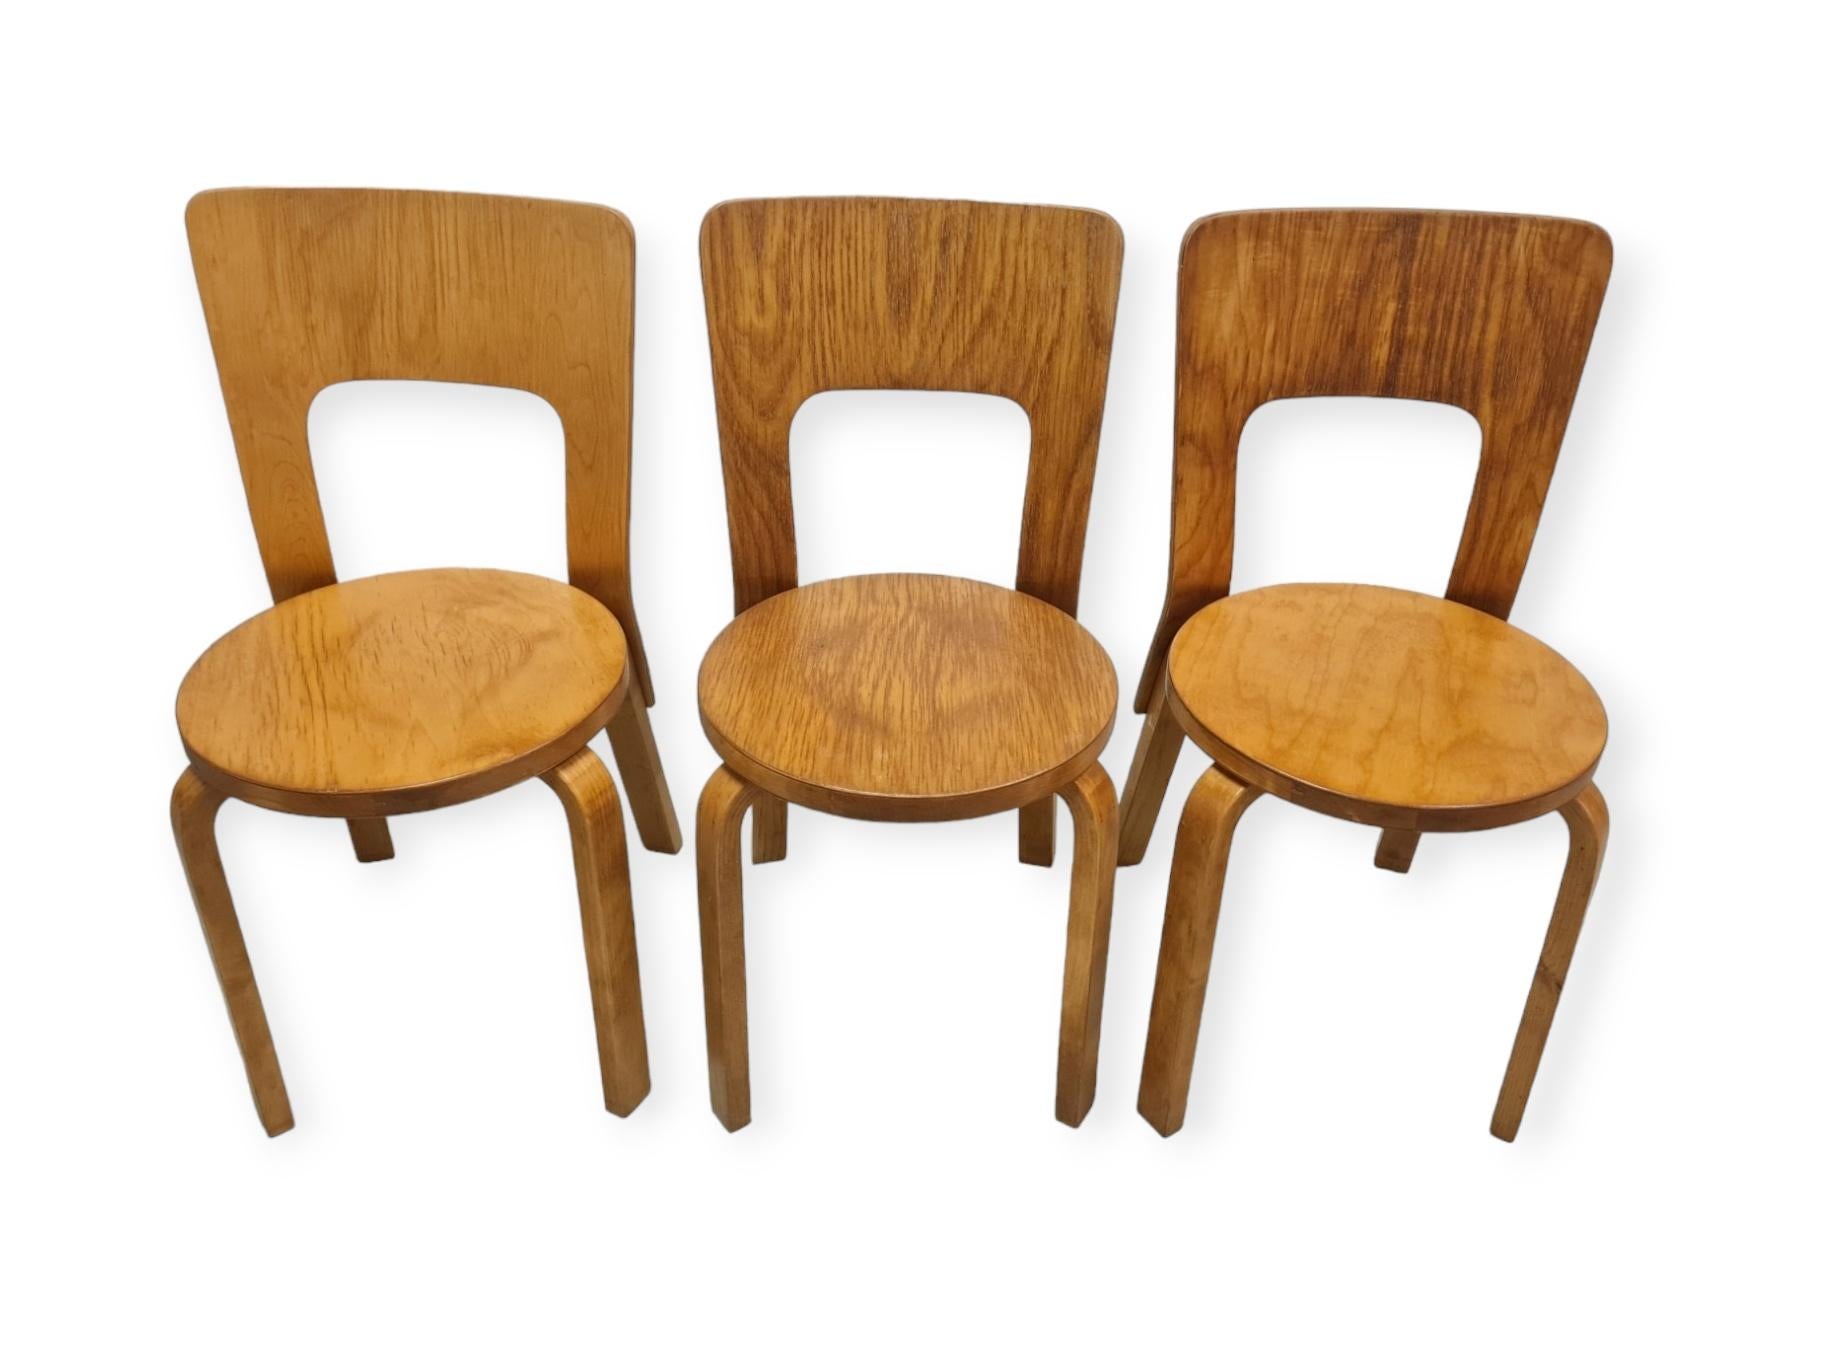 Alvar Aalto Dining Set with Lazy Susan and 6 Model 66 chairs, 1940s For Sale 8